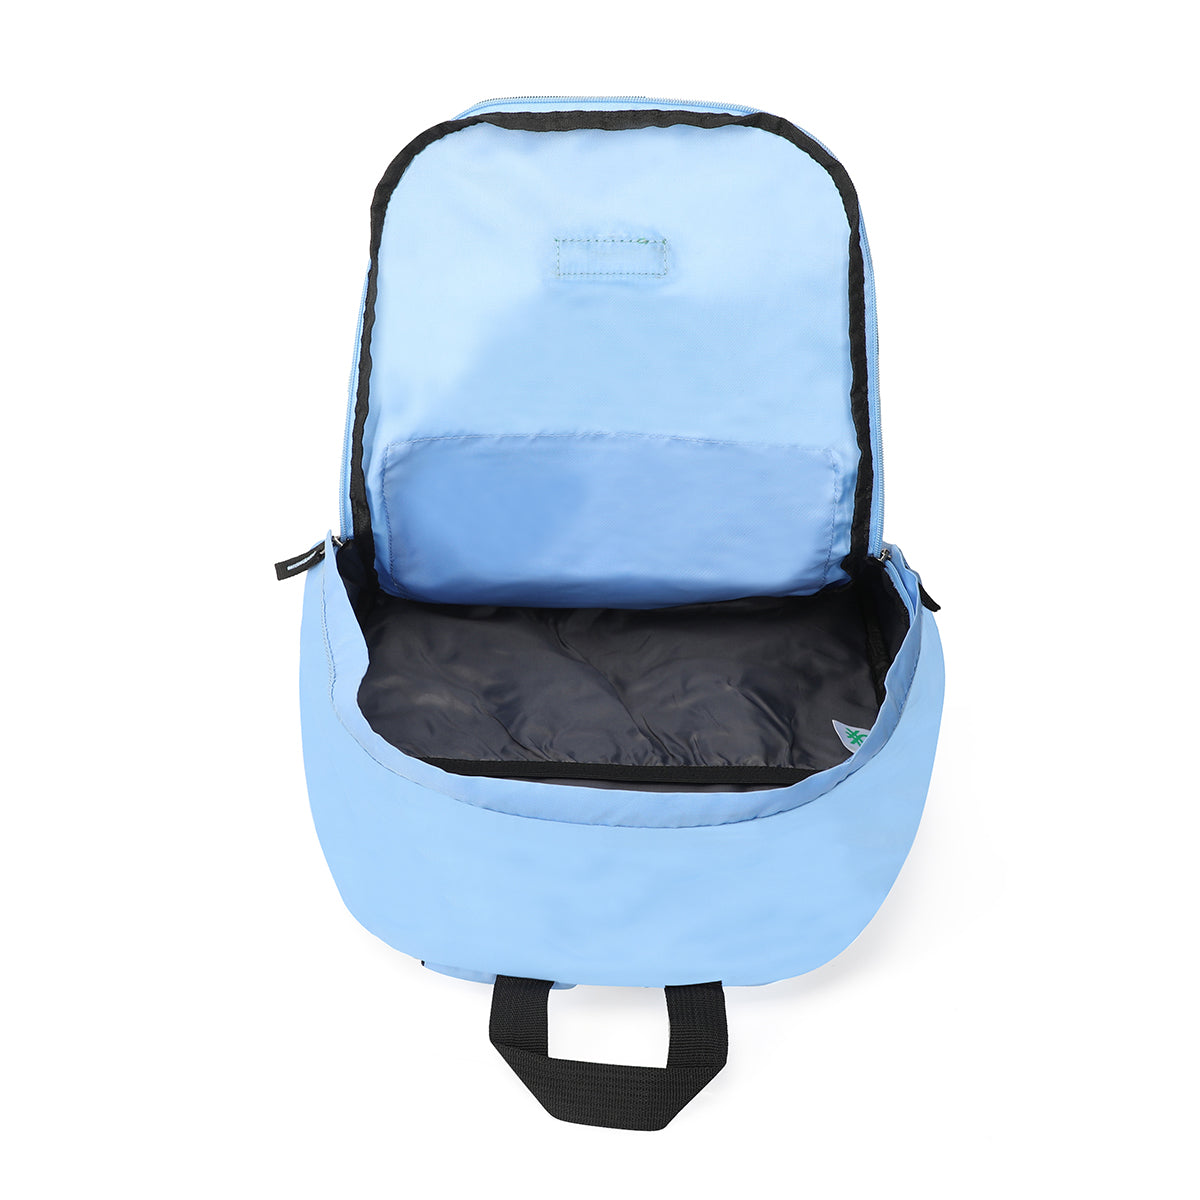 United Colors of Benetton Xenon Non Laptop Backpack light blue 